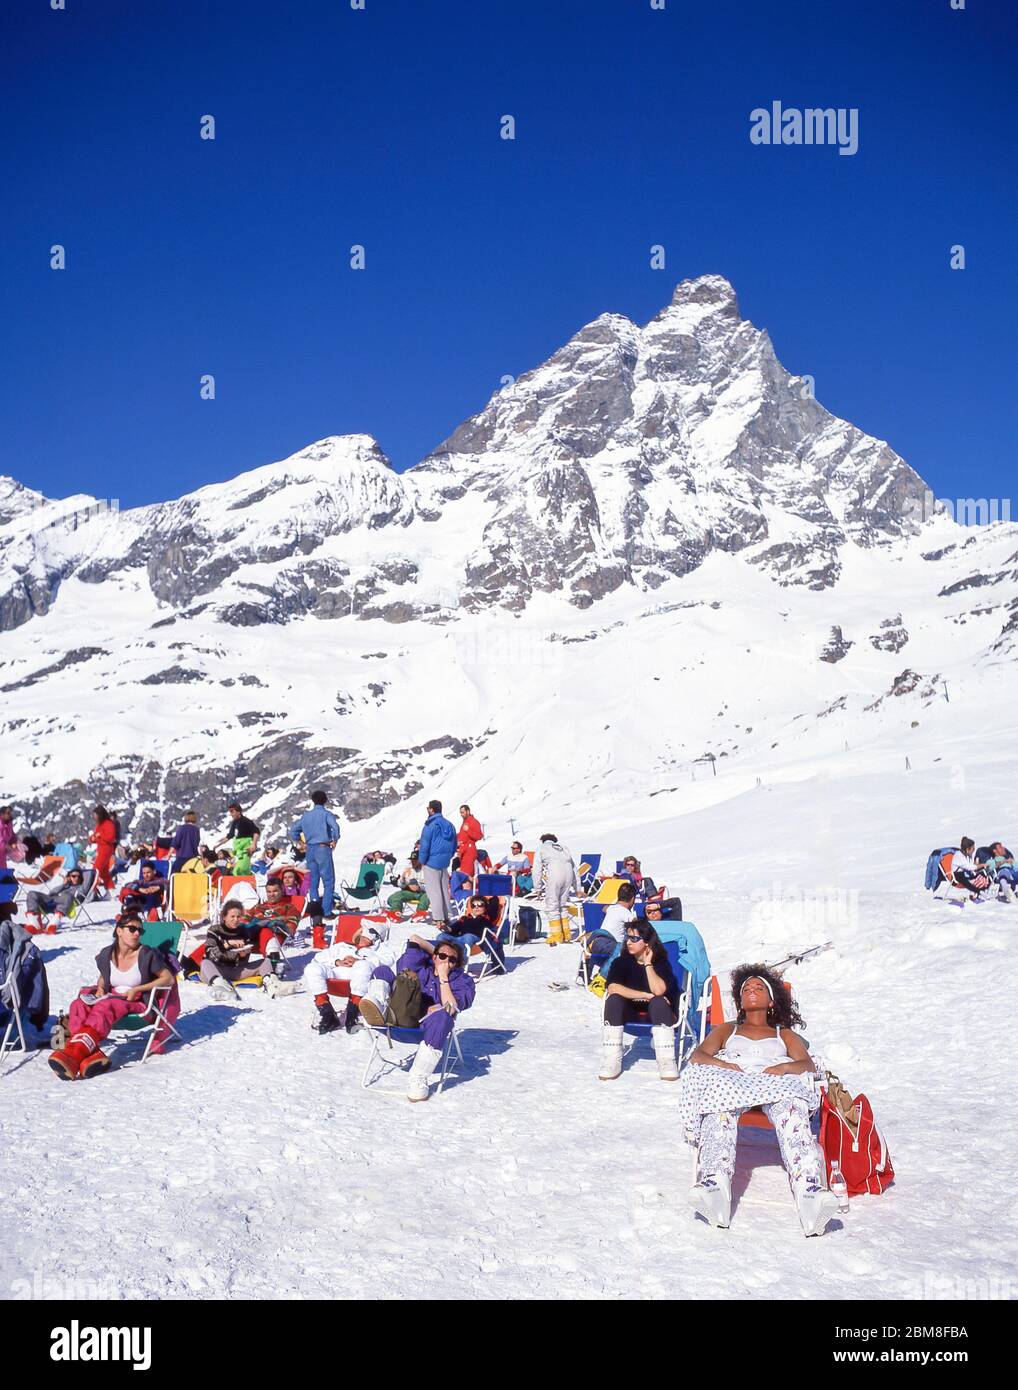 Skiers relaxing on piste, Breuil-Cervinia, Aosta Valley, Italy Stock Photo